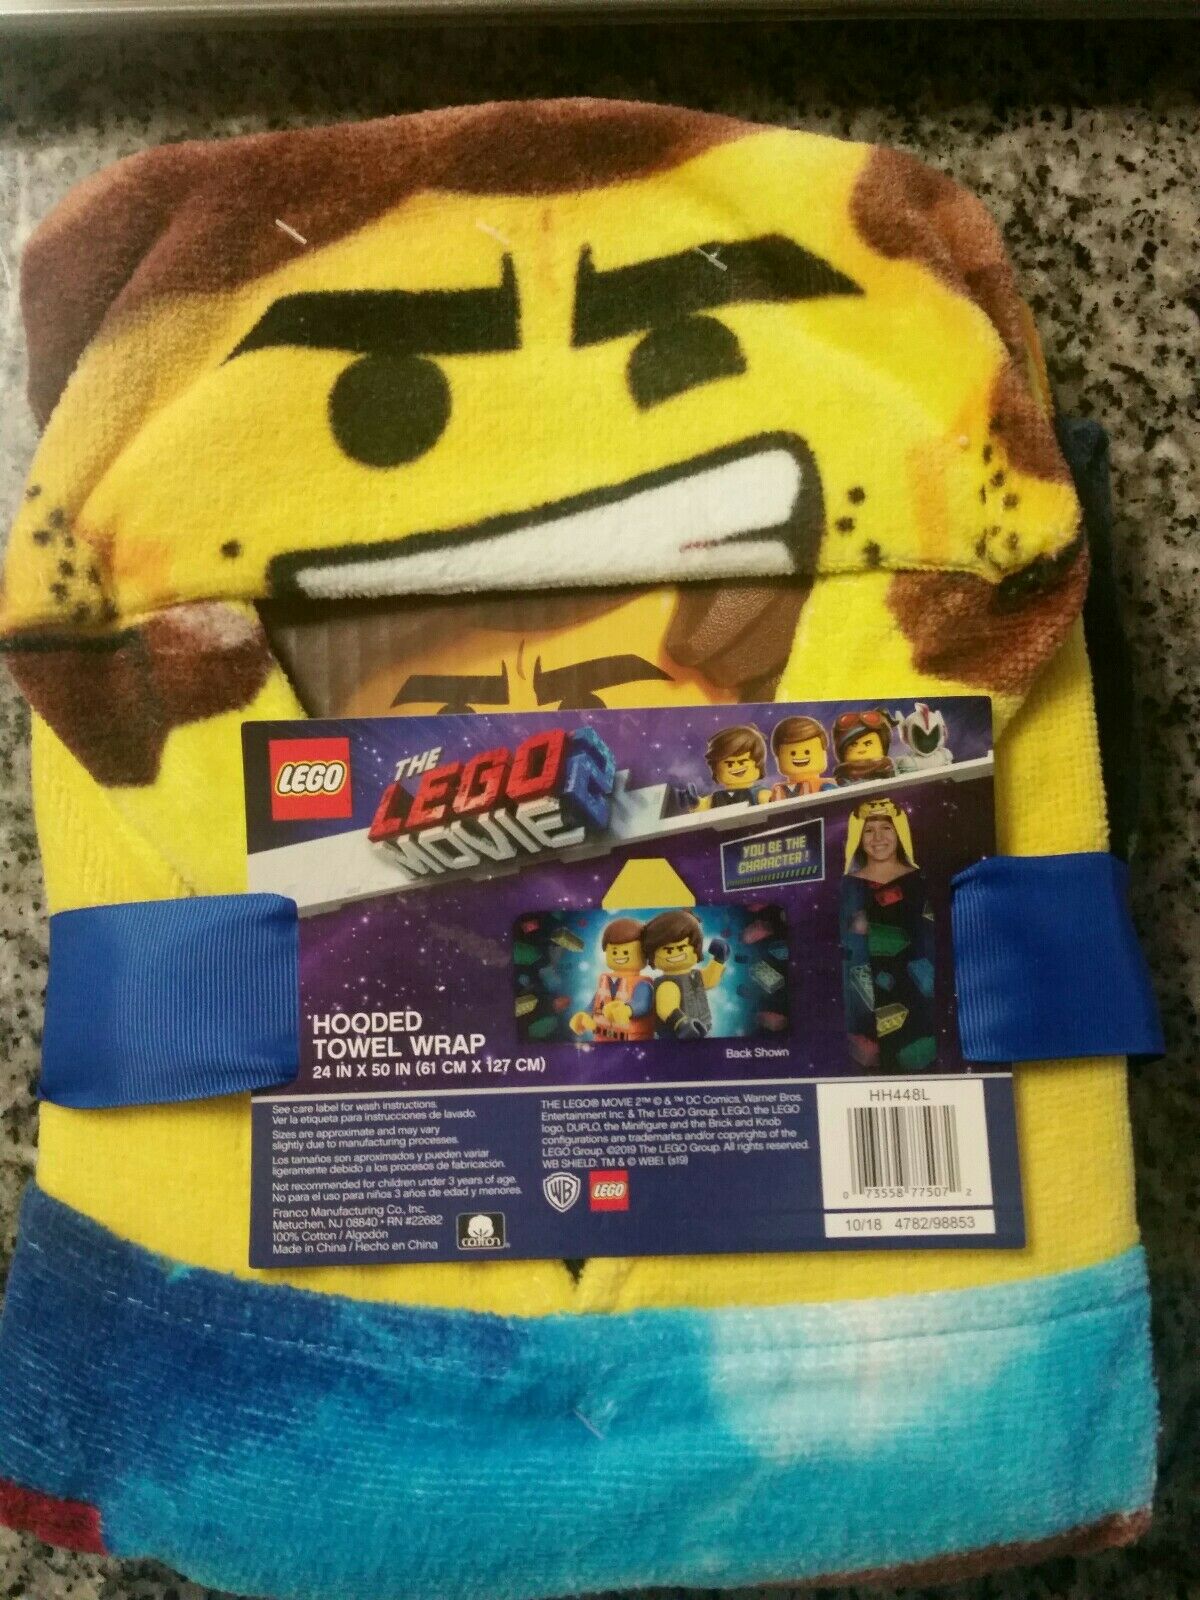 Franco The Lego Movie 2 Hooded Bath Towel Wrap - New Kids 24in X 50in